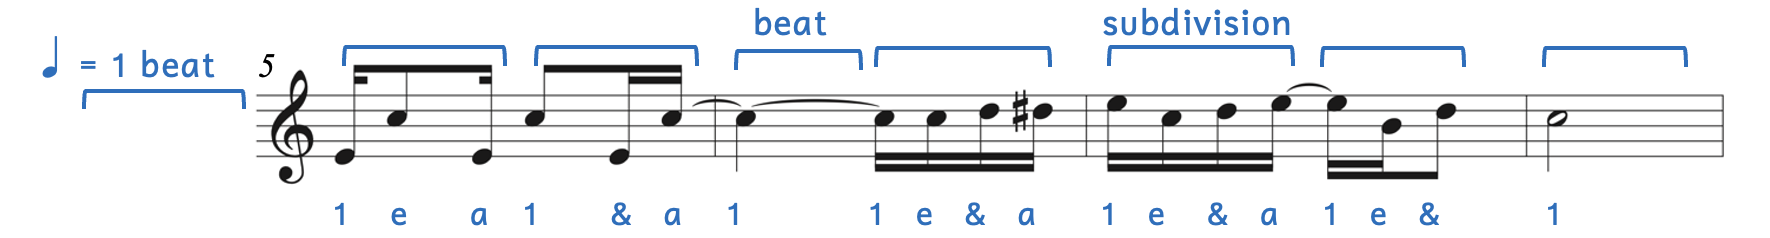 Example from Joplin's "The Entertainer" begins on measure 5. The quarter note equals one beat. First, a sixteenth note is beamed to an eighth note and another sixteenth note. Next, an eighth note is beamed to two sixteenth notes. In measure 6, a quarter note is followed by four sixteenth notes beamed together. In measure 7, four sixteenth notes are beamed together followed by two sixteenth notes and an eighth note beamed together. Measure 8 has a half note. The annotation shows the quarter note in measure 6 equals one beat and the four sixteenth notes in measure 7 equal the subdivision. The rhythm syllables are given below. They are 1, ee, uh, 1, and, uh, 1, 1, ee, and, uh, 1, ee, and, uh, 1, ee, and, 1.